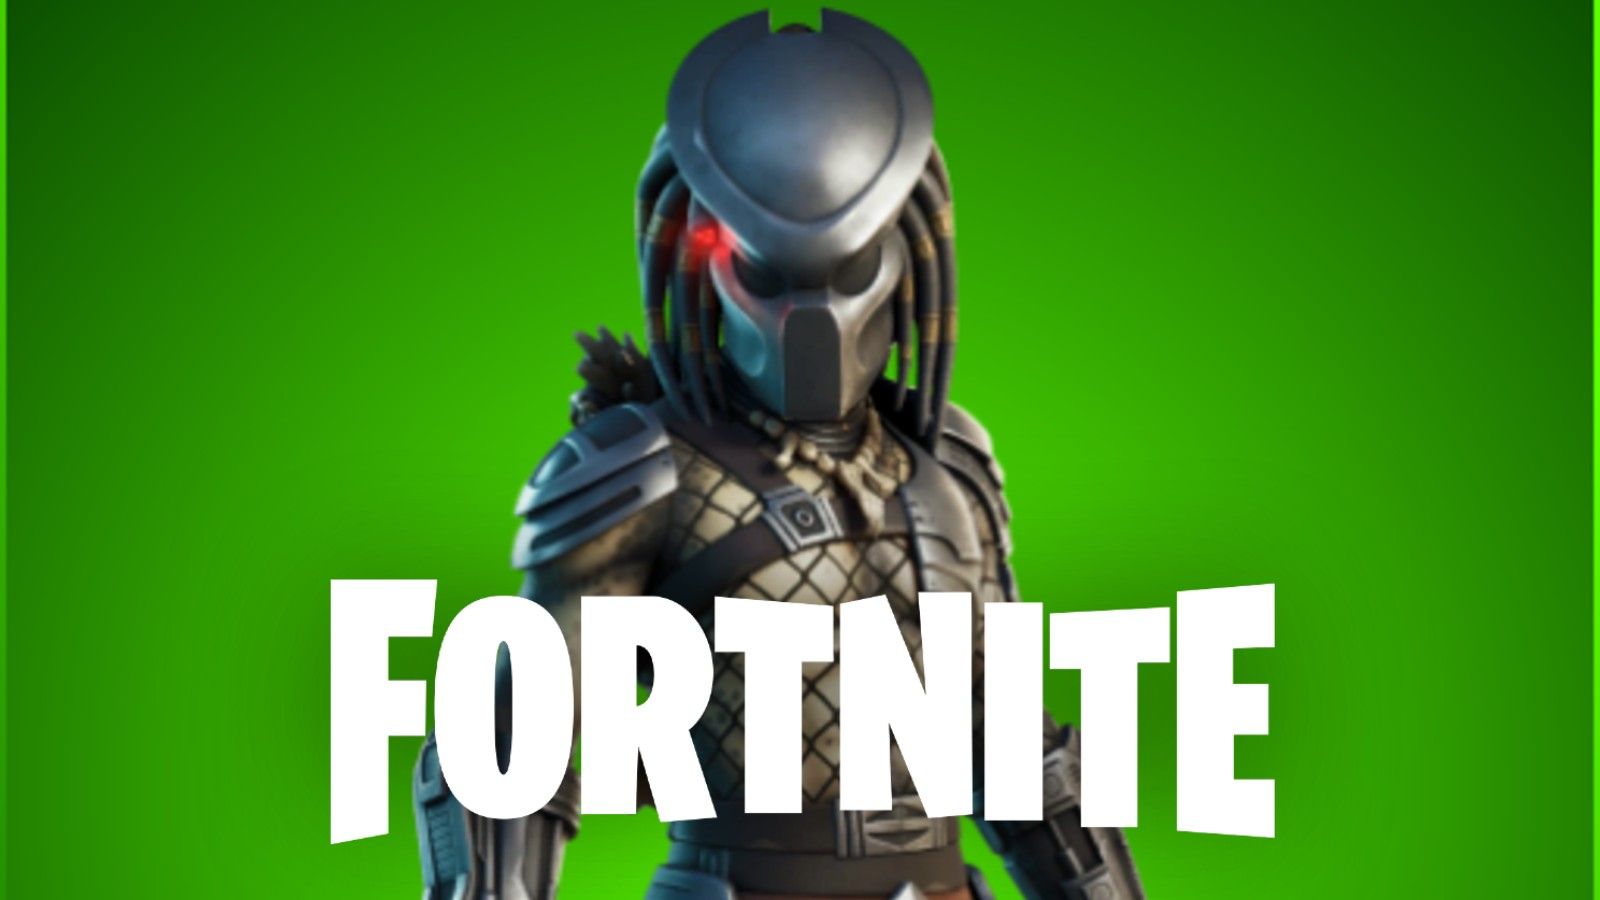 Fortnite leaked skins and cosmetics after v15.21 update